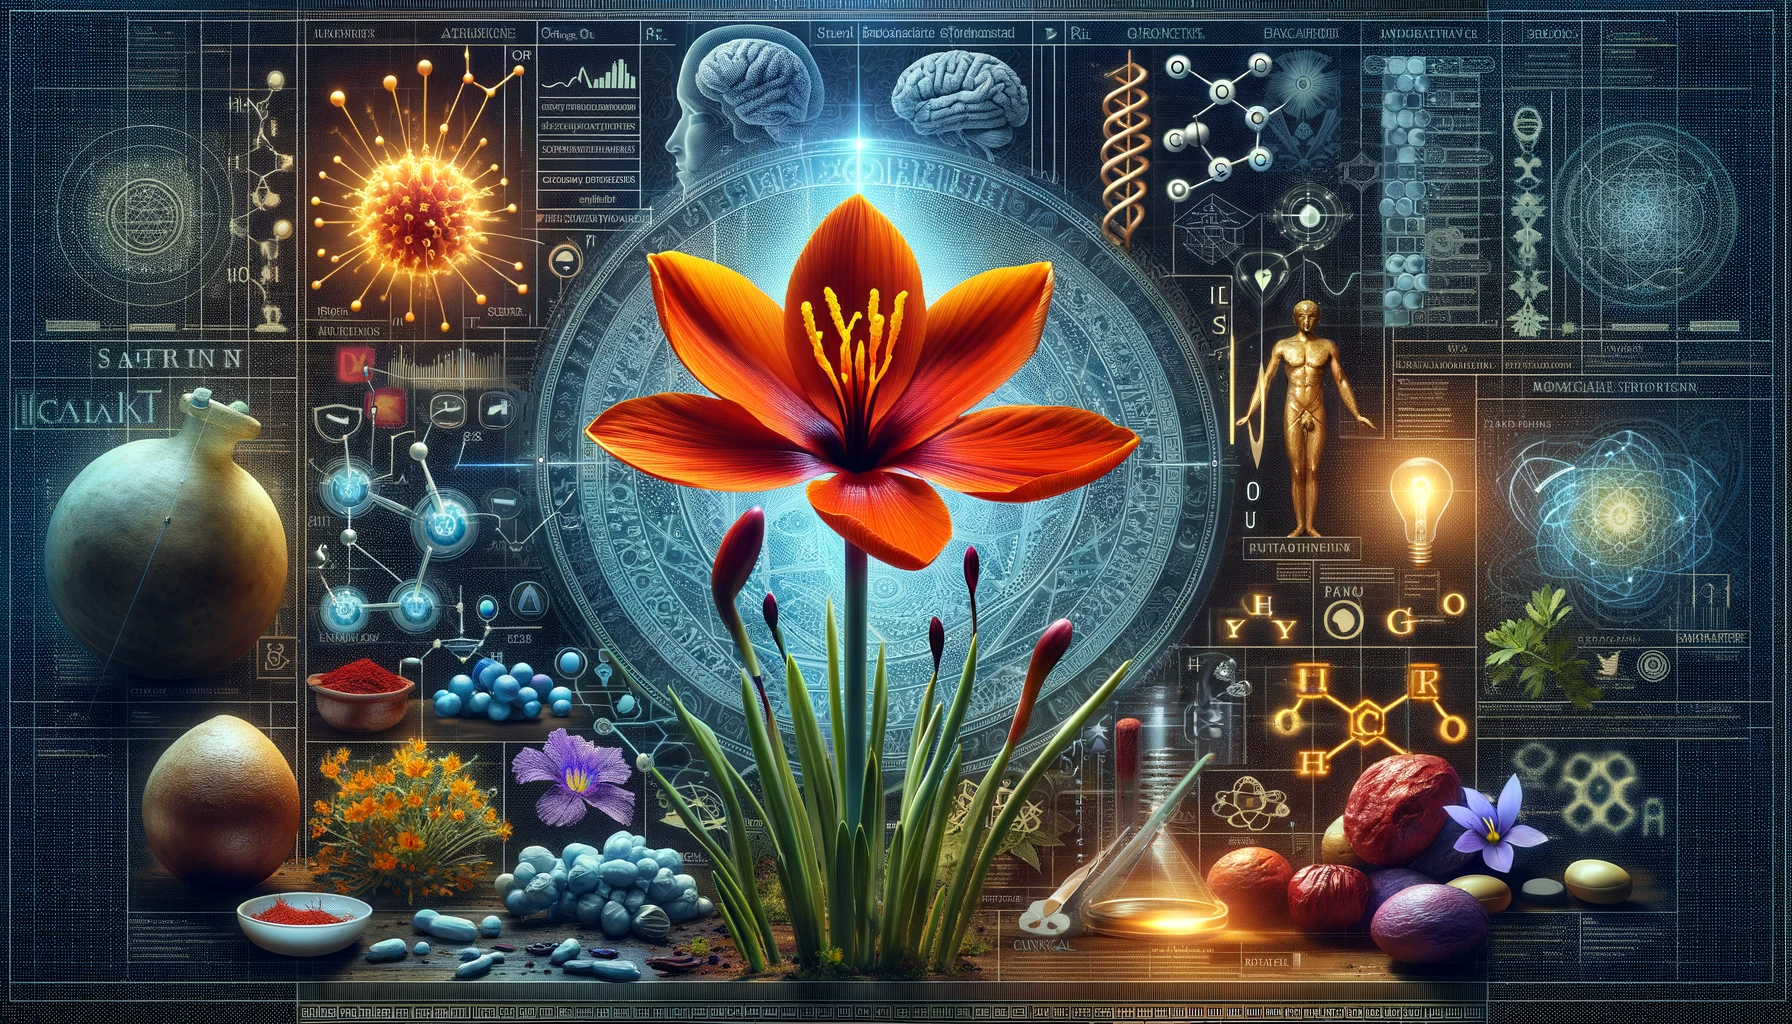 Artistic illustration of the various benefits of saffron on a futuristic display behind a desk on which the saffron flower is kept alongside other healthy products.